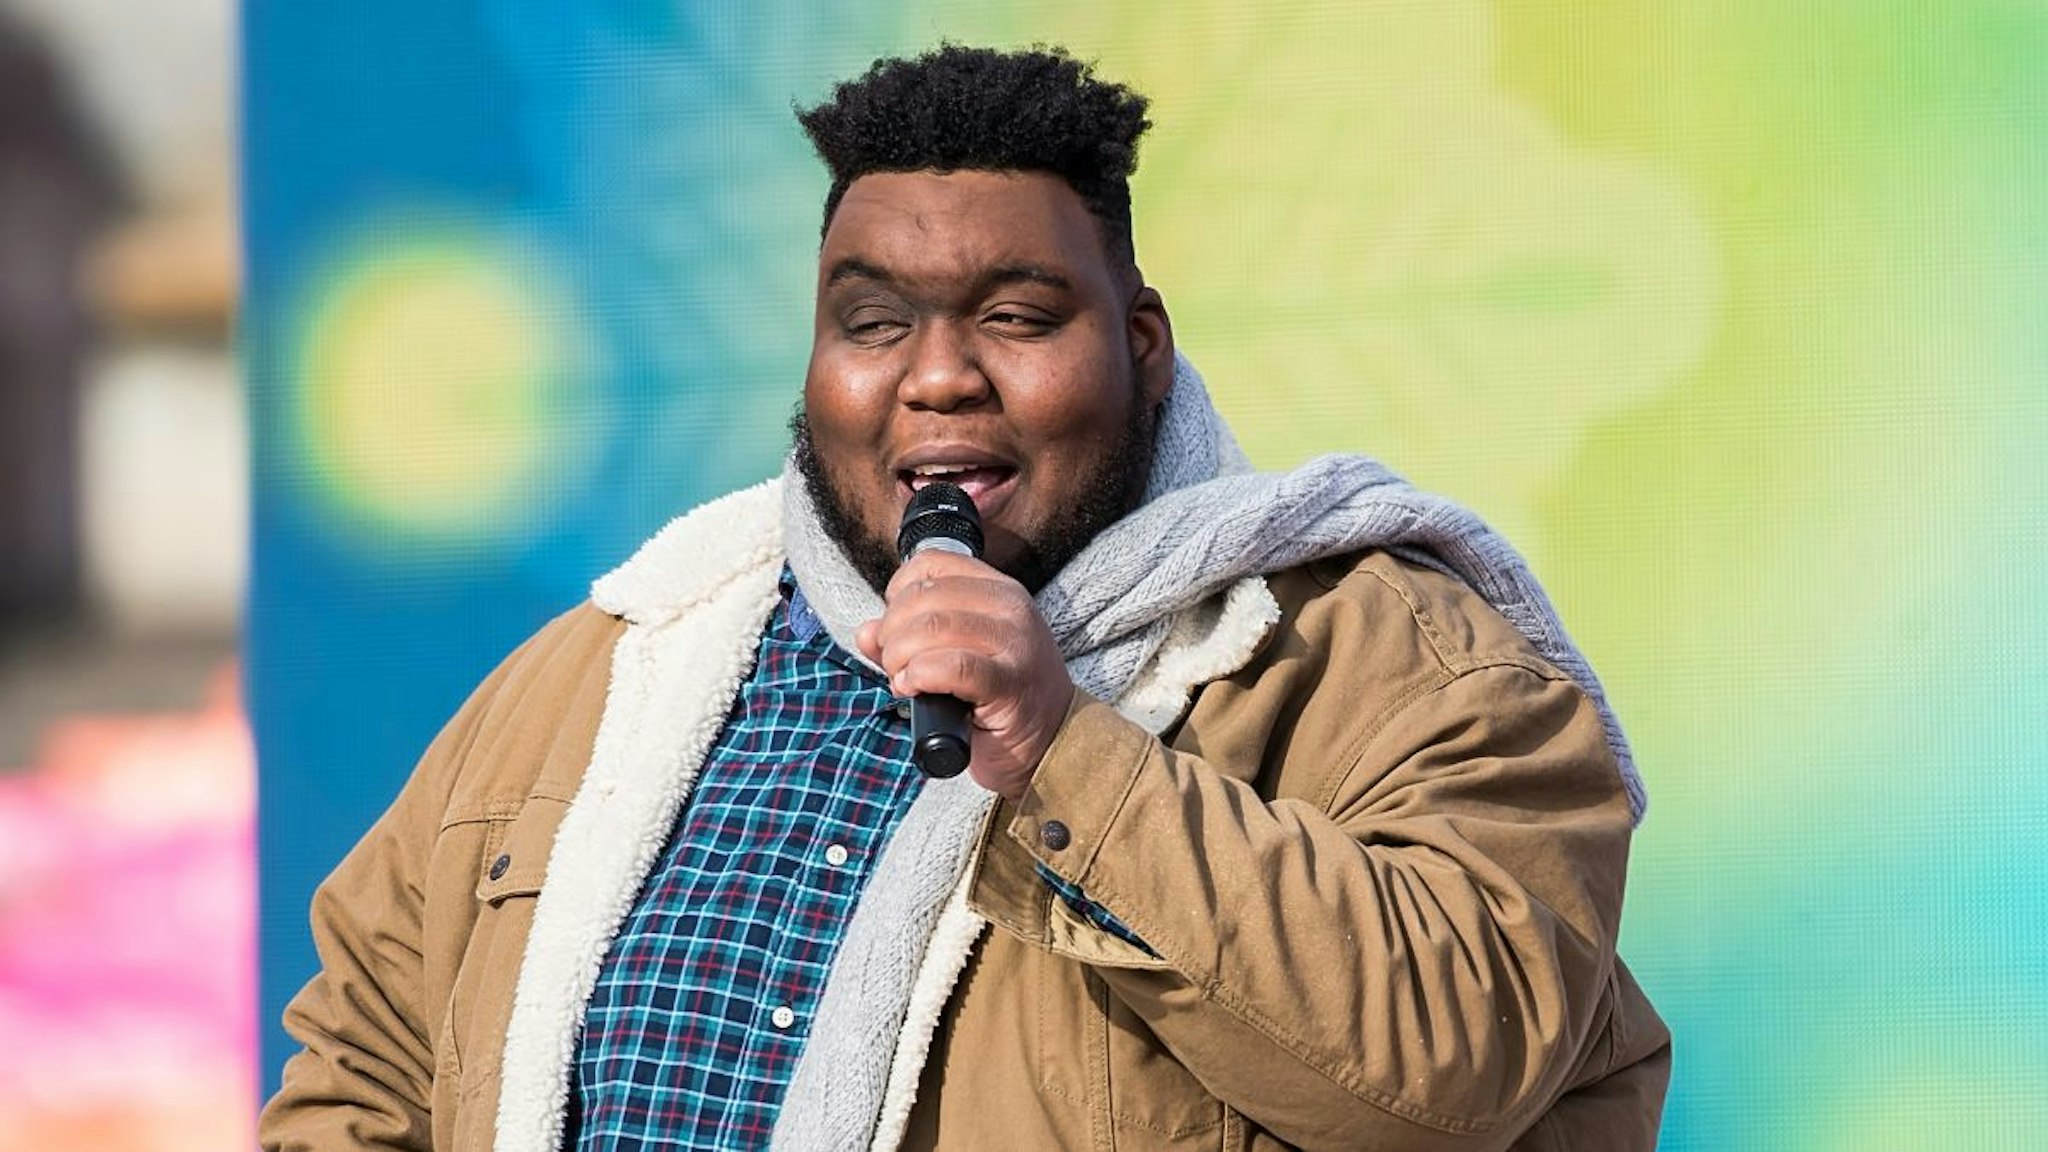 Singer Willie Spence is seen during the 102nd 6abc Dunkin' Donuts Thanksgiving Day Parade on November 25, 2021 in Philadelphia, Pennsylvania.